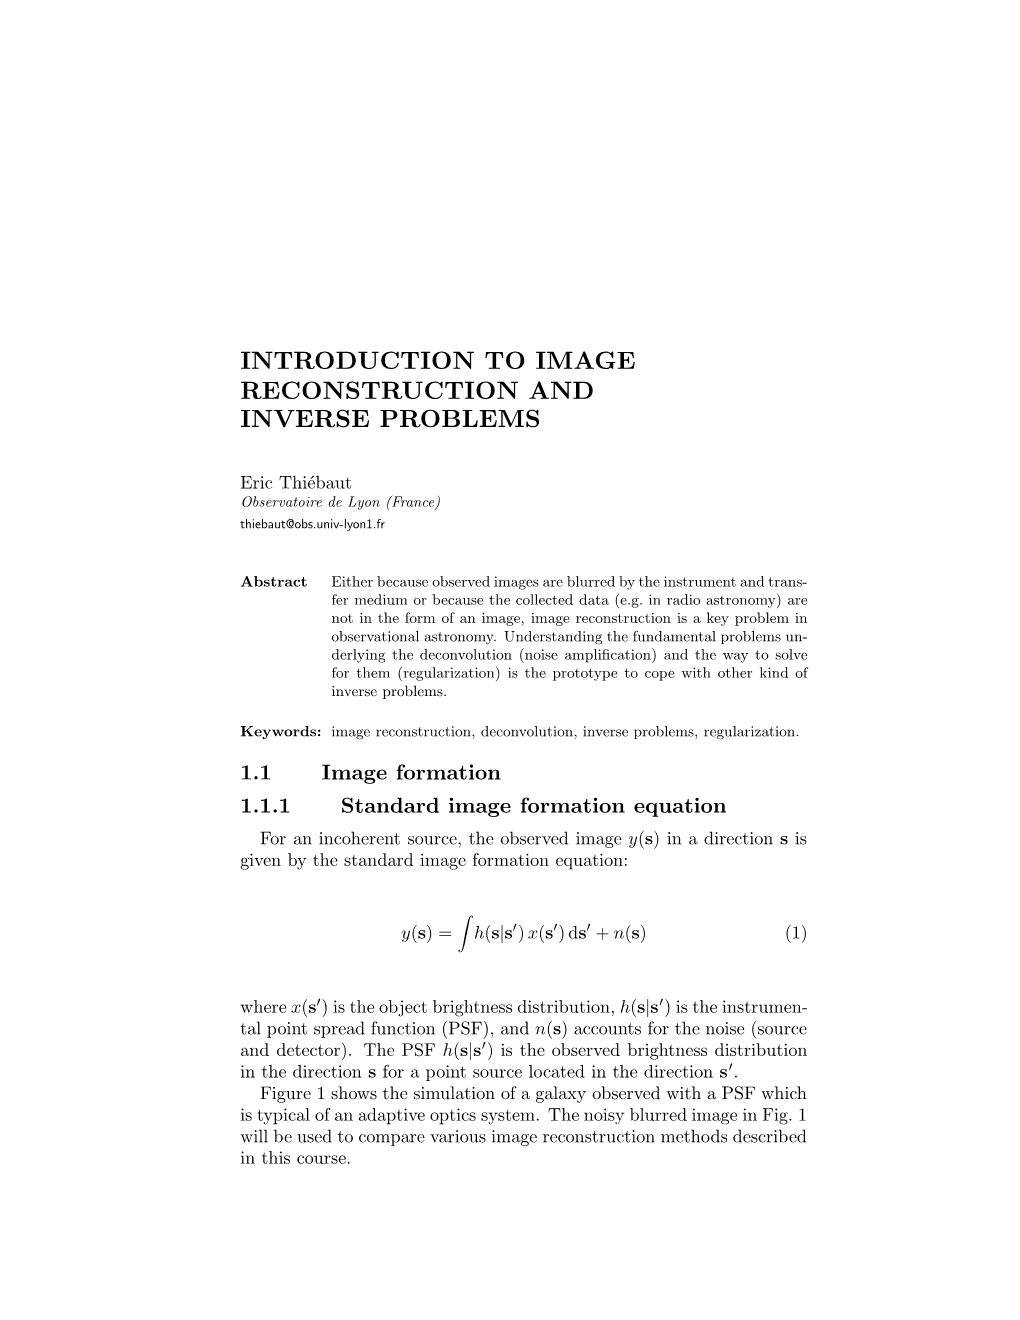 Introduction to Image Reconstruction and Inverse Problems